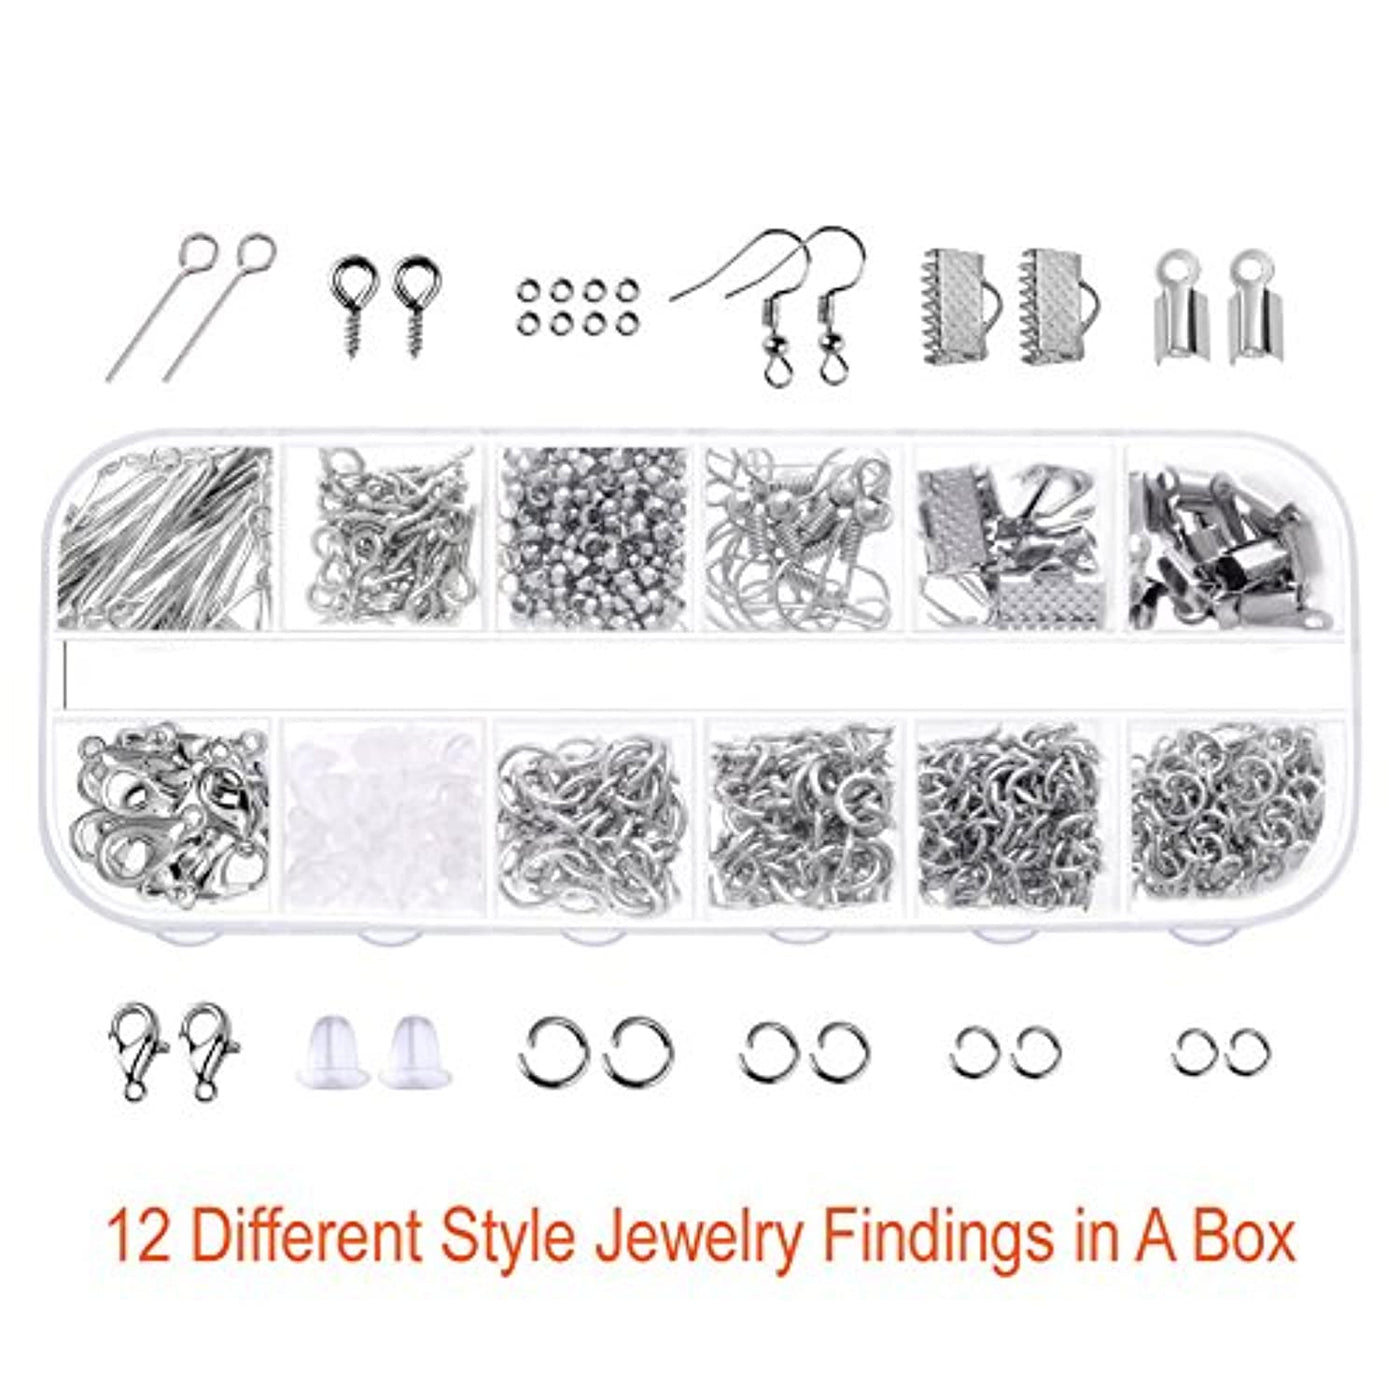 AL-Tools Jewelry Making Supplies Kit with Jewelry Tools, Jewelry Wires and Jewelry Findings for Jewelry Repair and Beading